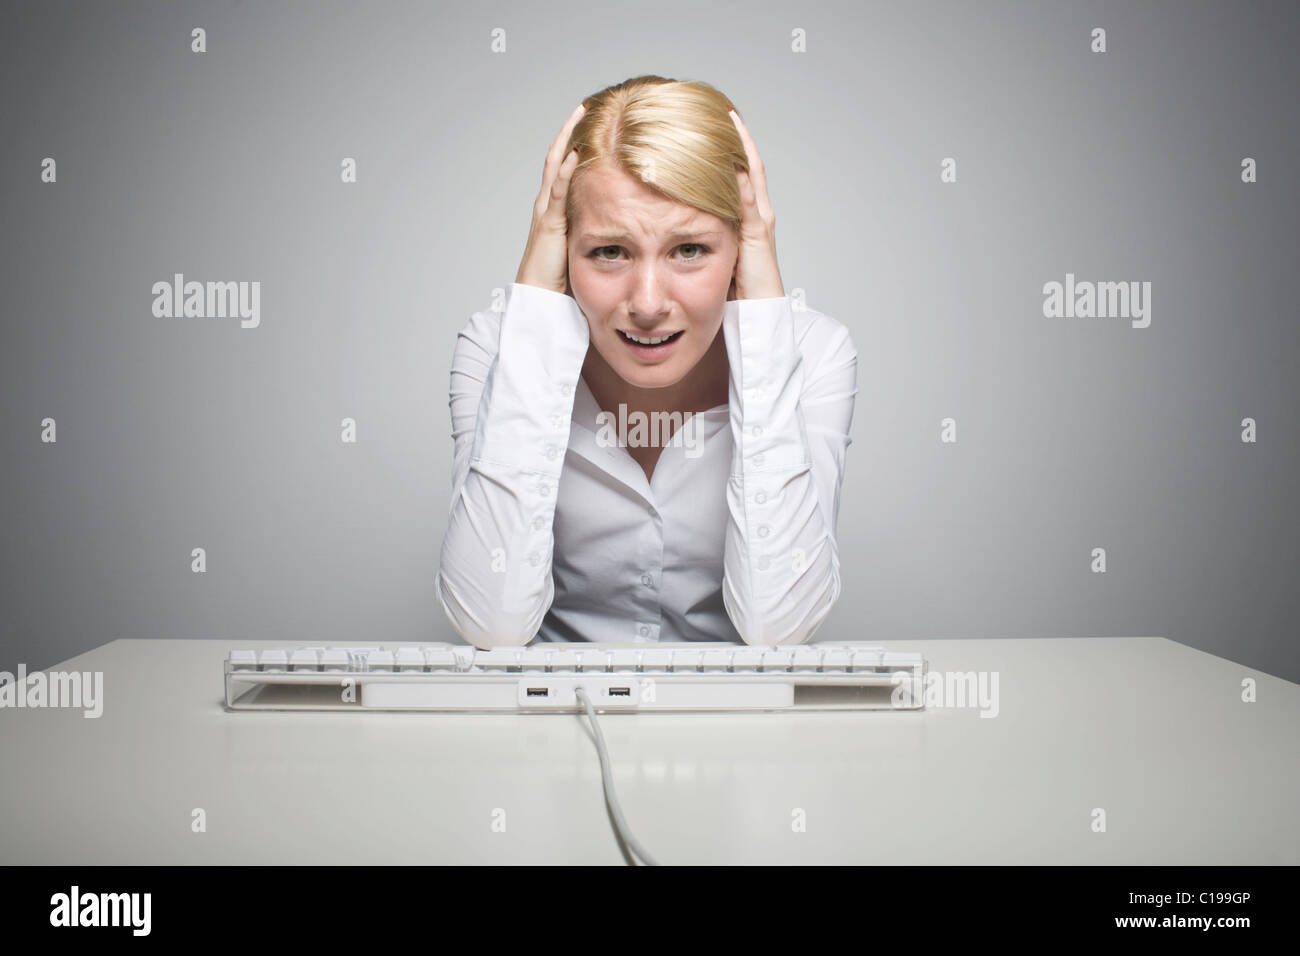 Young blond woman sitting in front of a computer keyboard, desperate Stock Photo